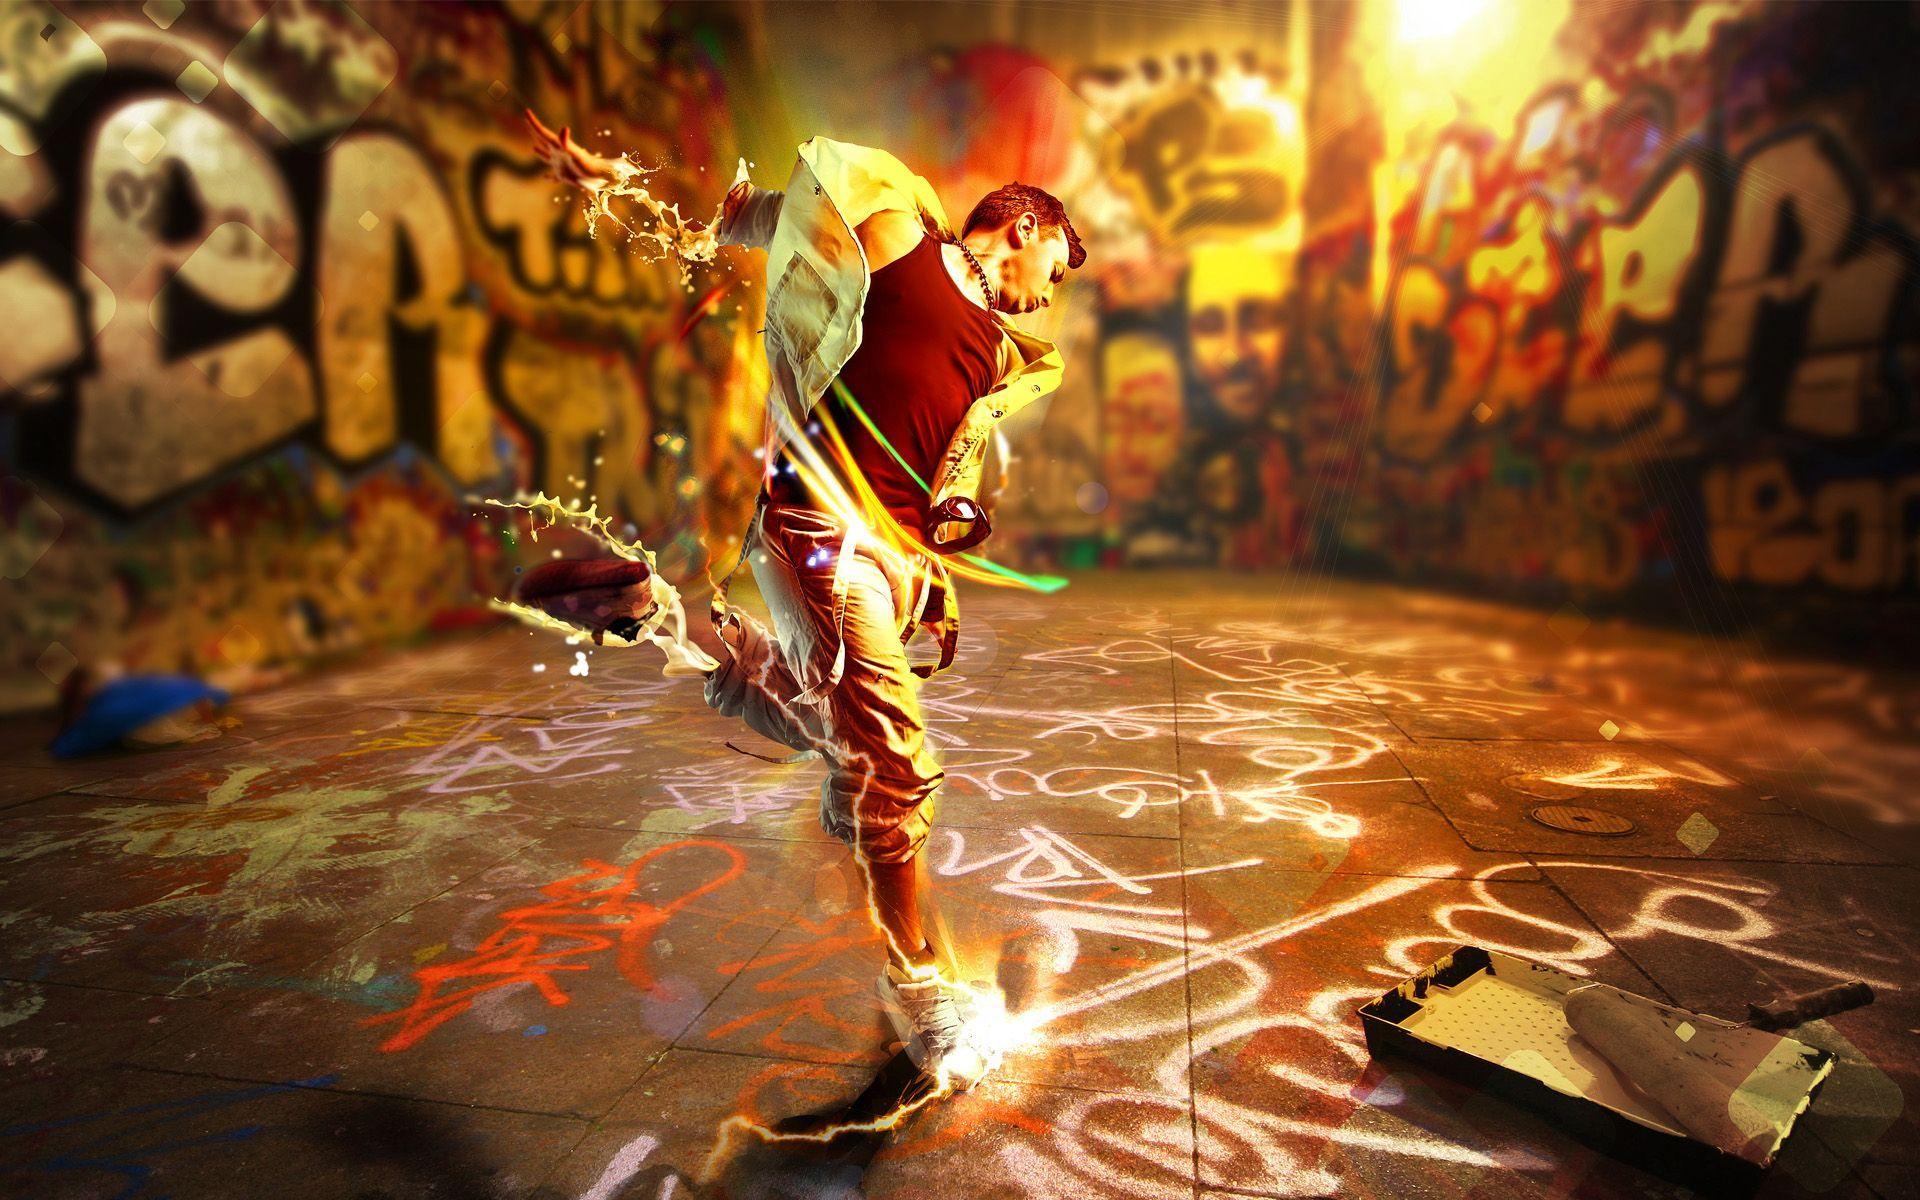 Rock On The Dance Floor. HD Dance and Music Wallpaper for Mobile